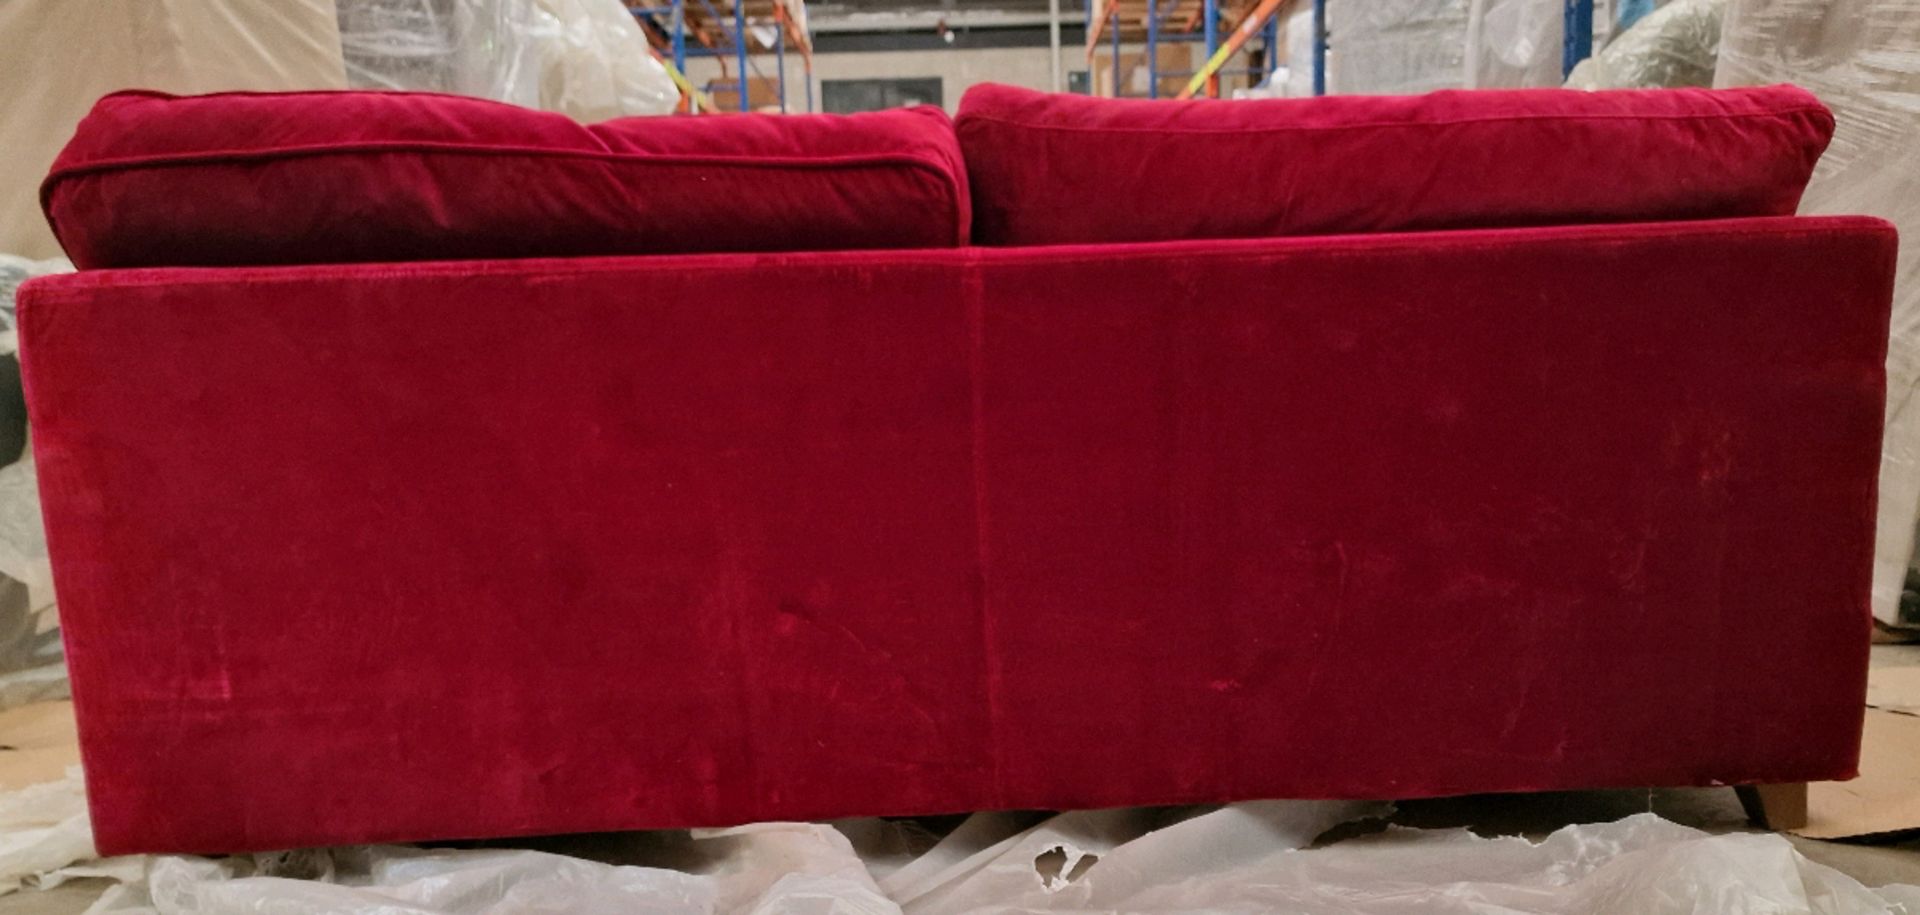 Crushed velvet red 4 seater sofa bed - Image 3 of 5